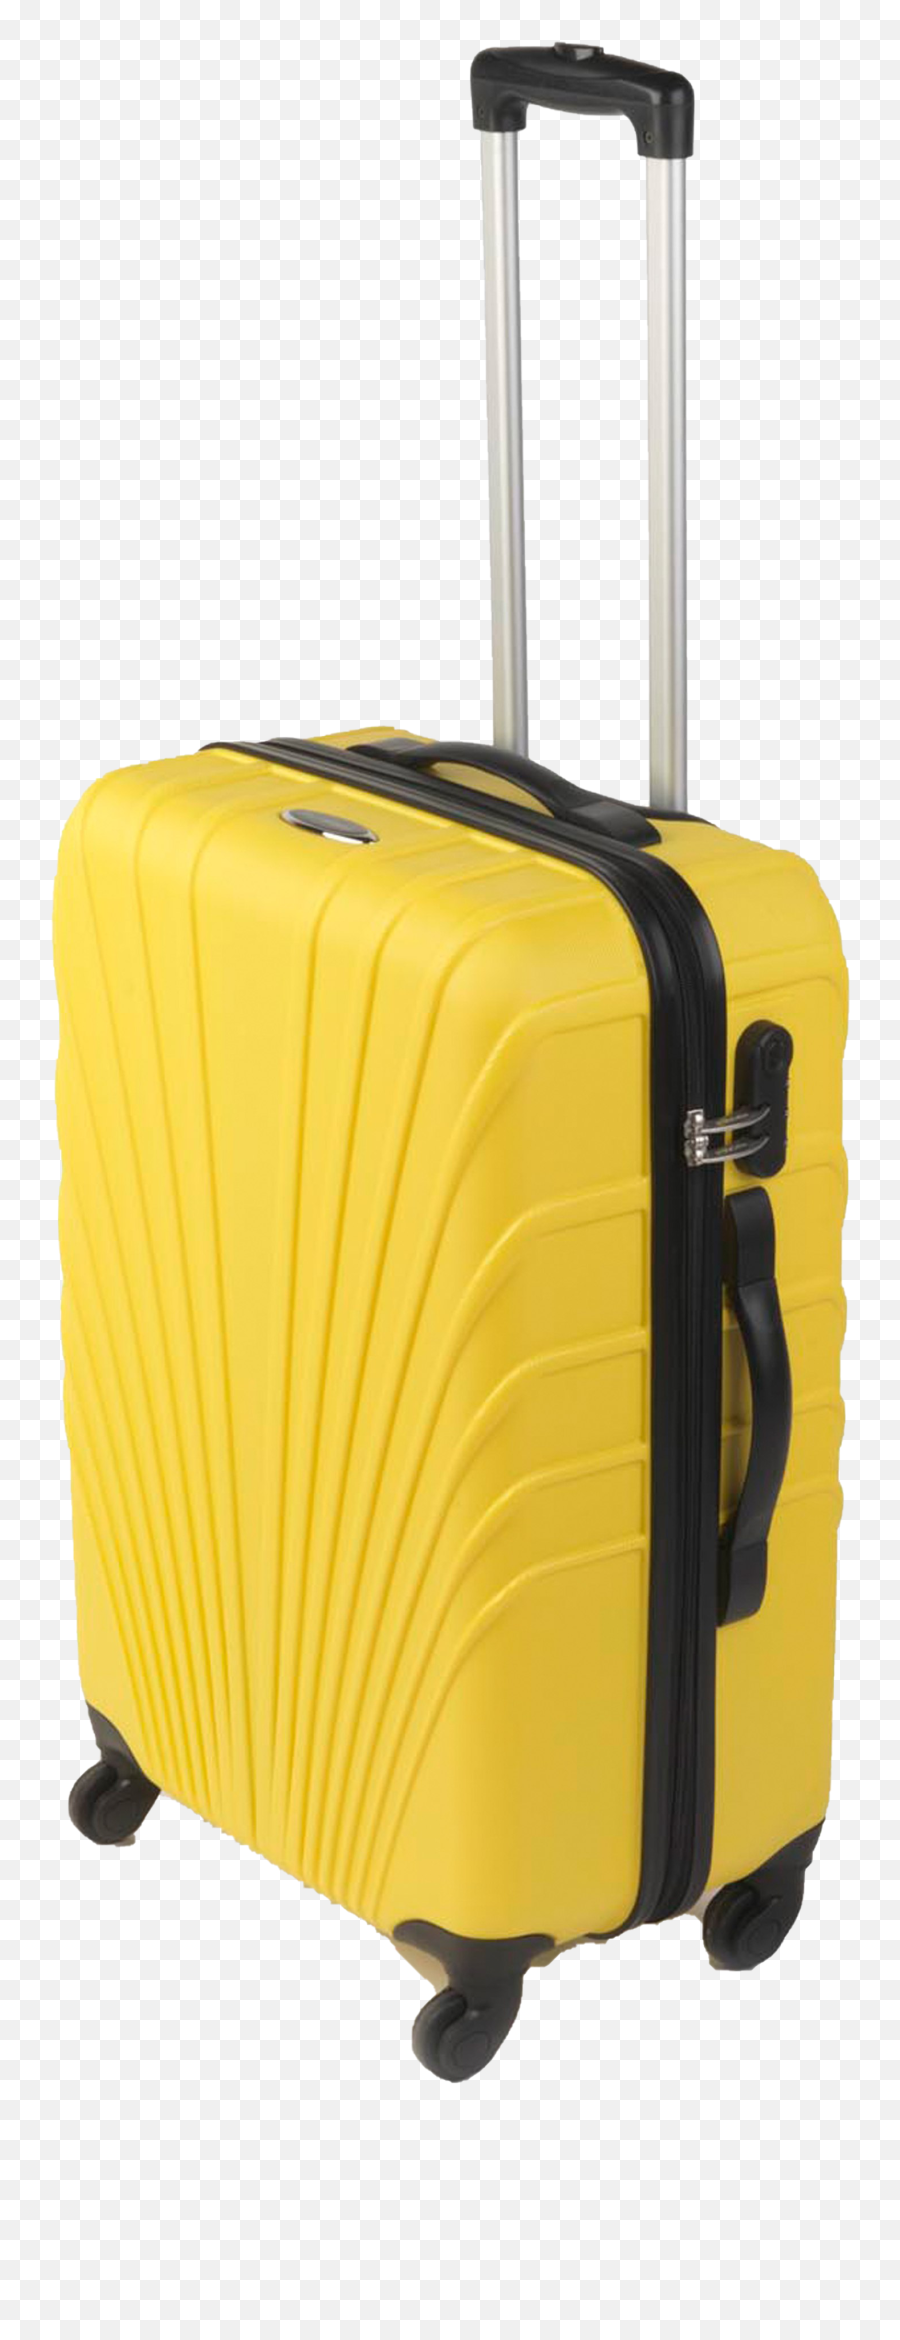 Suitcase Png Free File Download - Transparent Background Suitcase Png Transparent,Suitcase Png